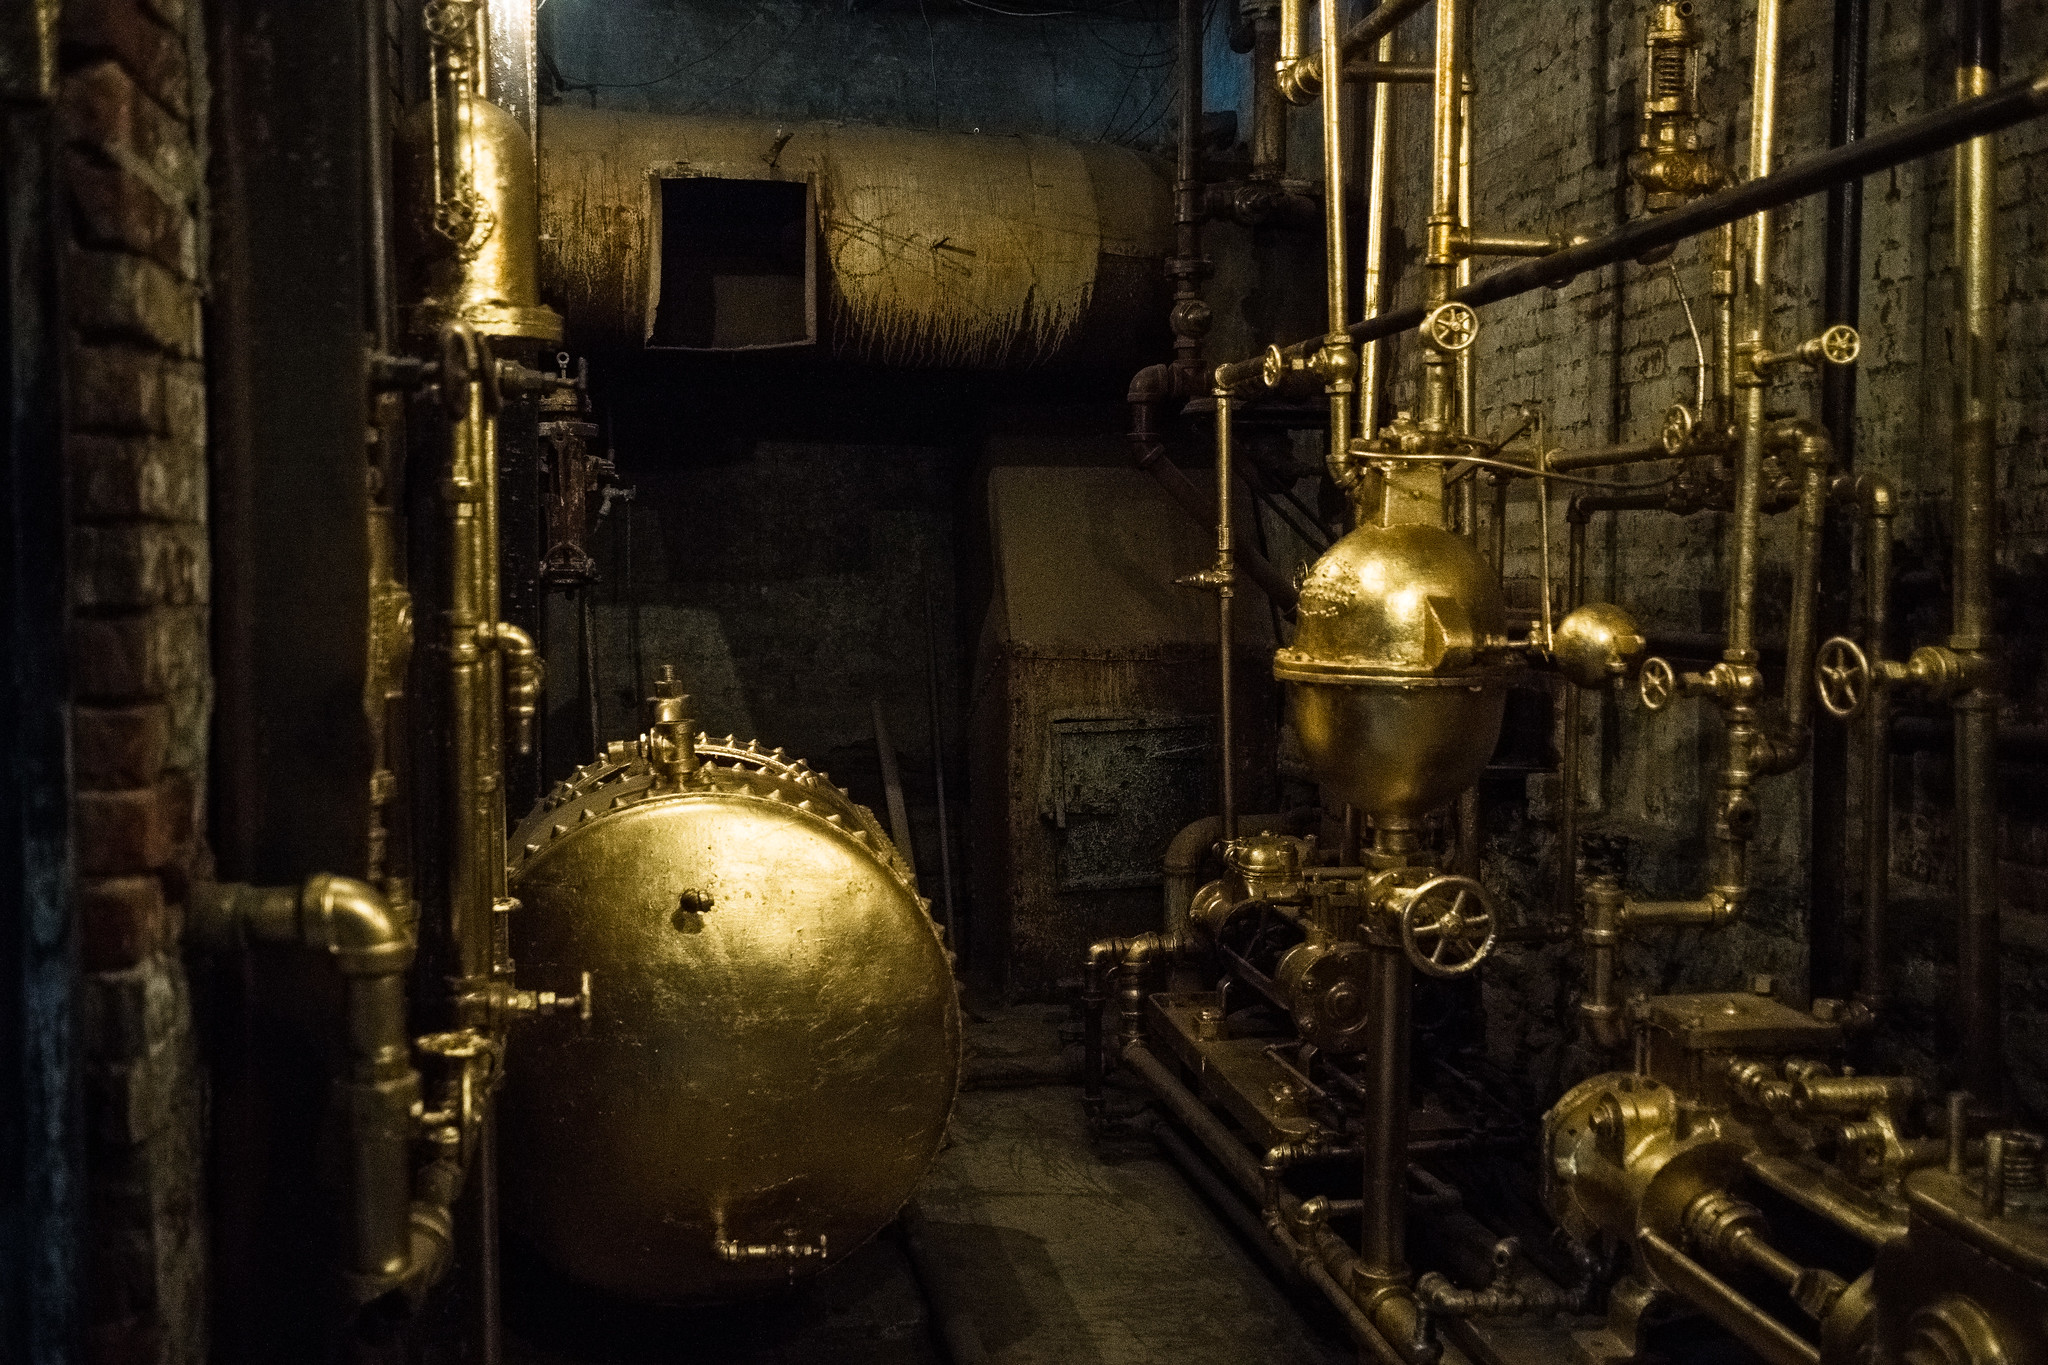 Photograph of a dingy boiler room where metal pipes are adorned with tiny knobs